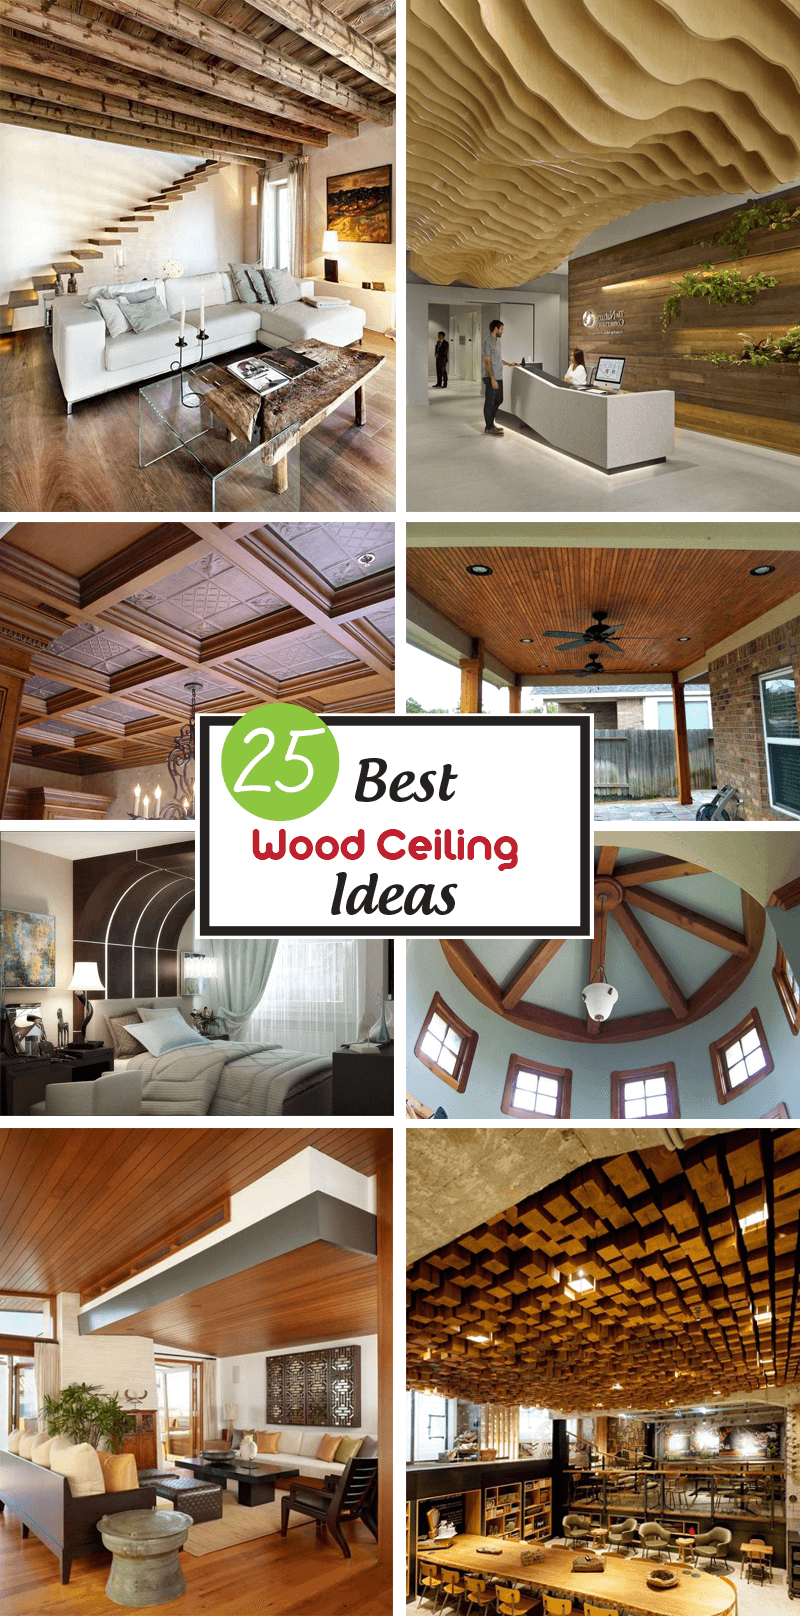 25 Best Wood Ceiling Ideas To Add Charm To Your Home Interiorsherpa